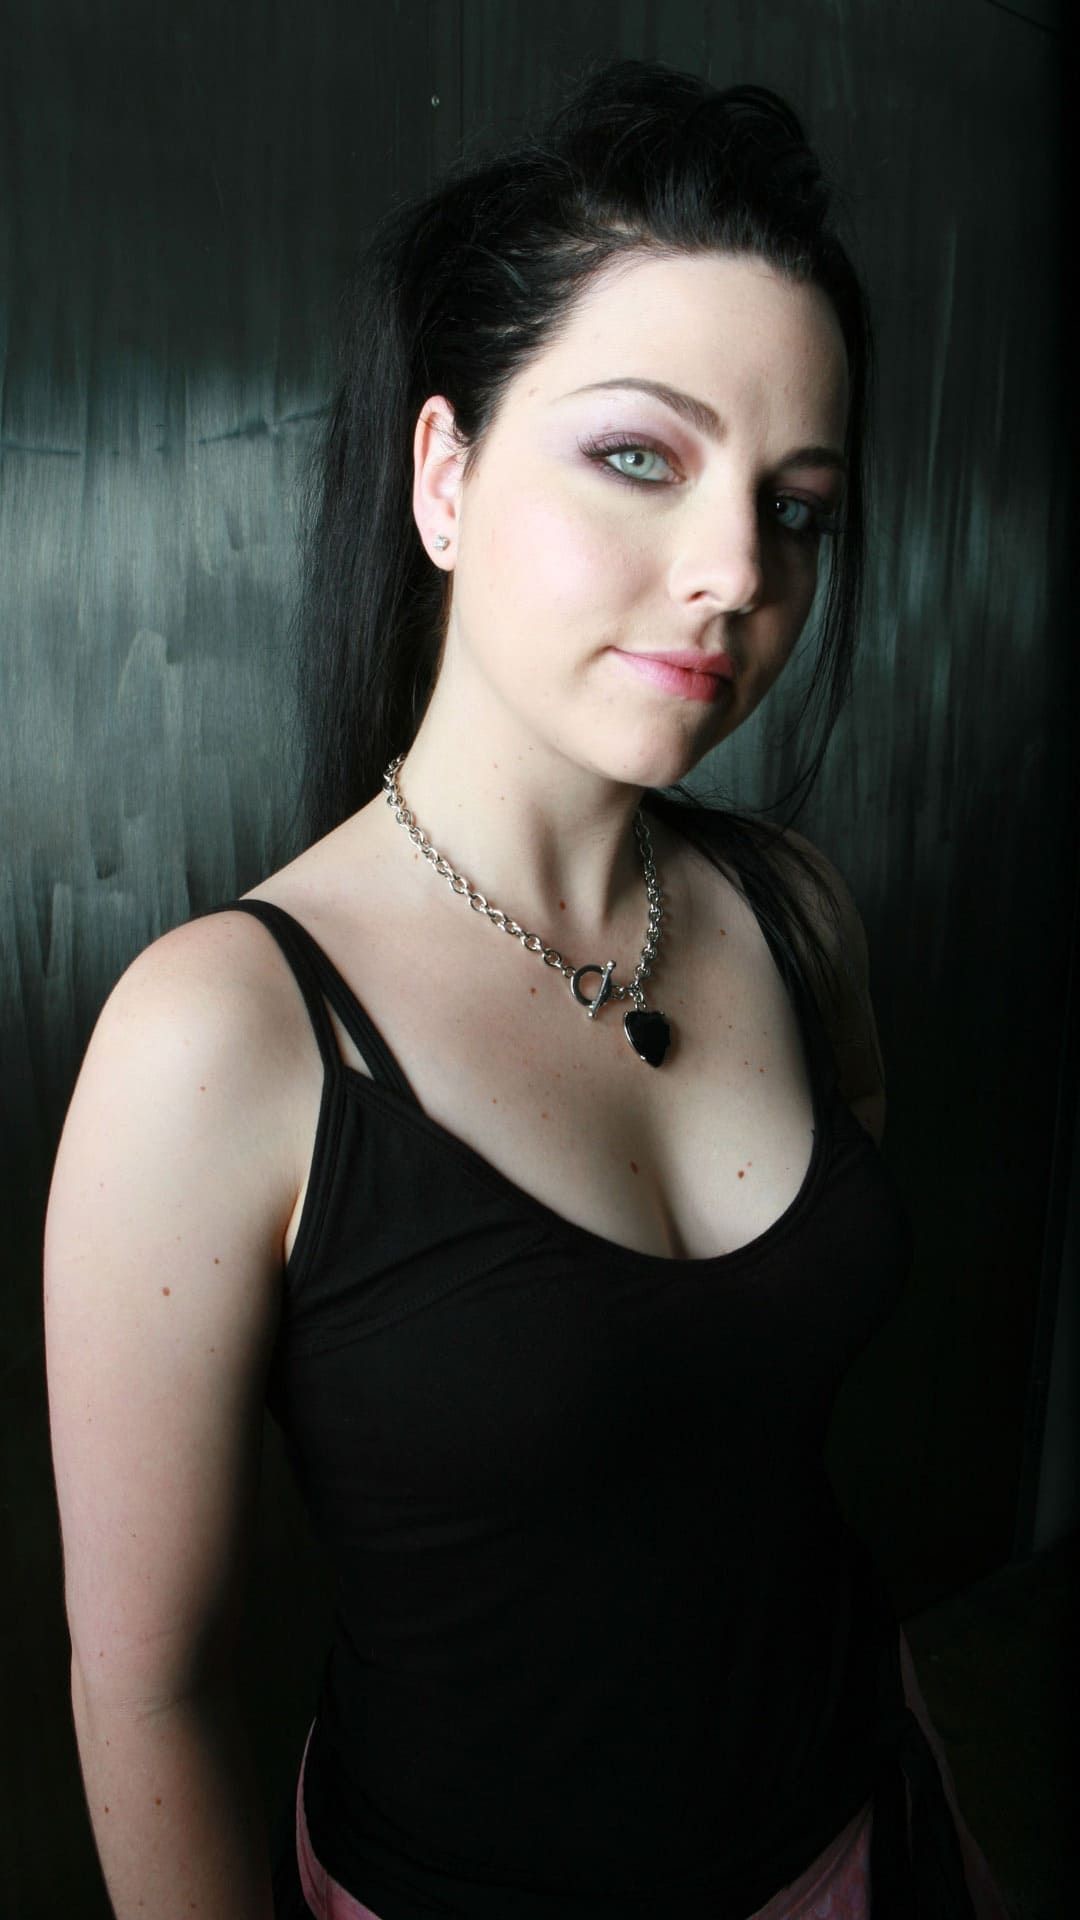 1080x1920 http://mobw.org/15265/amy-lee-images.